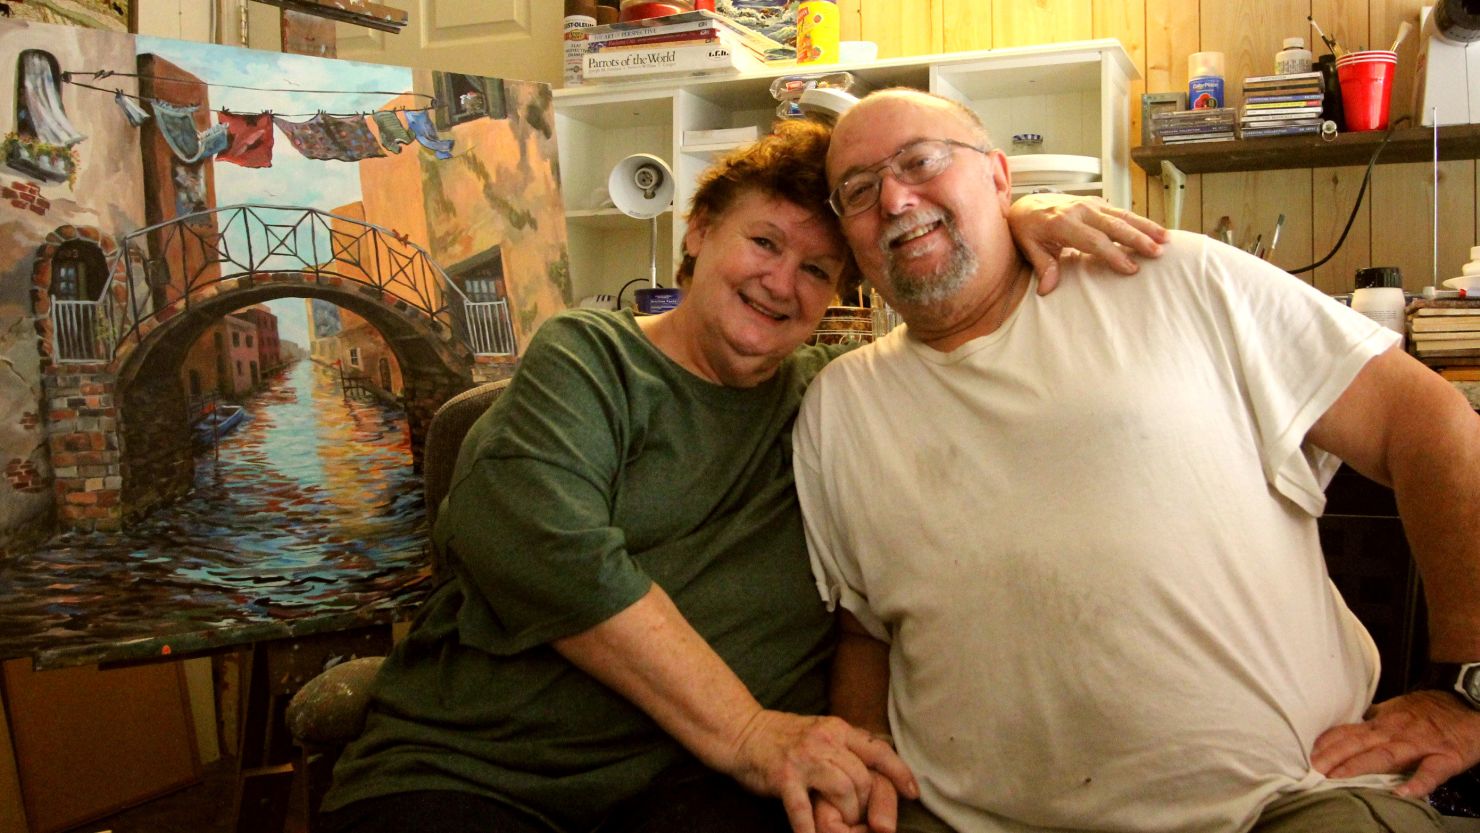 Janet and Richard Copeland say one of their few disagreements as a couple is over the Affordable Care Act.